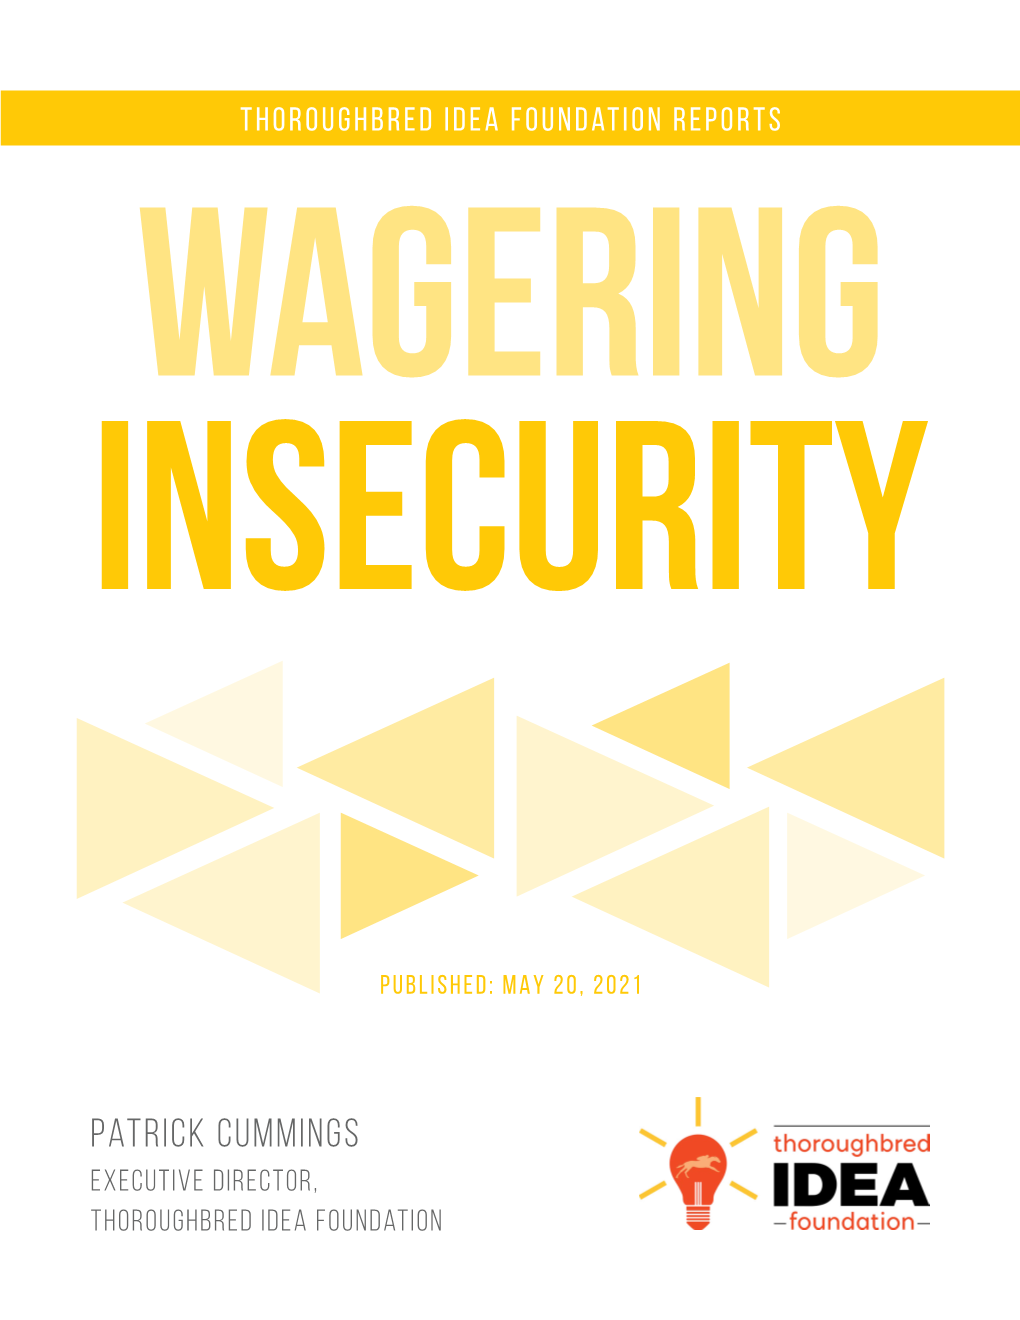 Wagering Insecurity